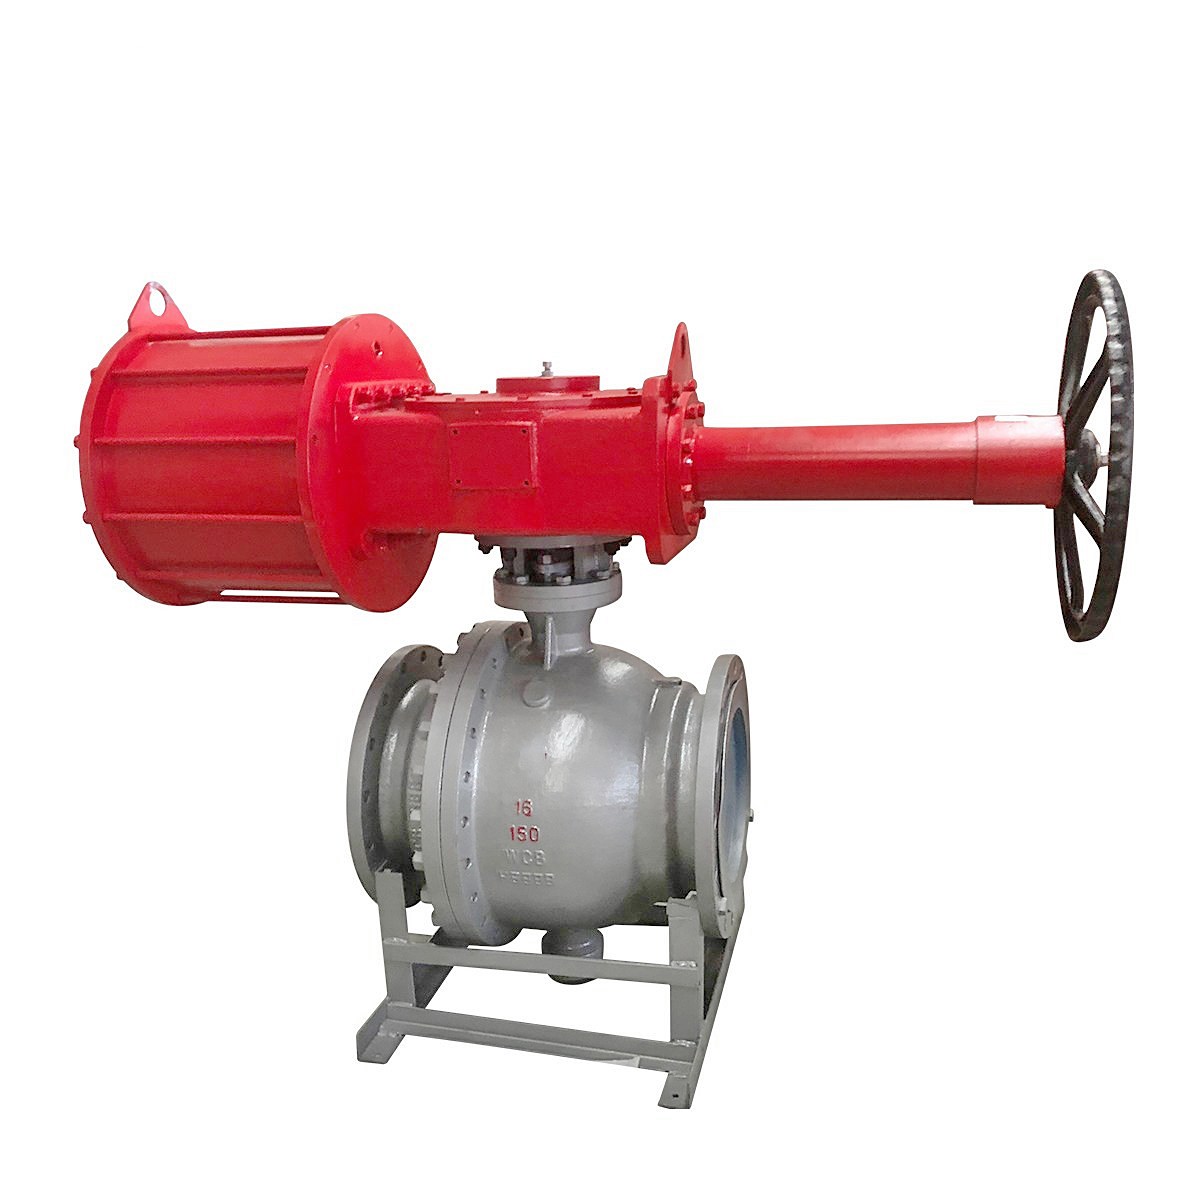 Pneumatic operated ball valves with manual override